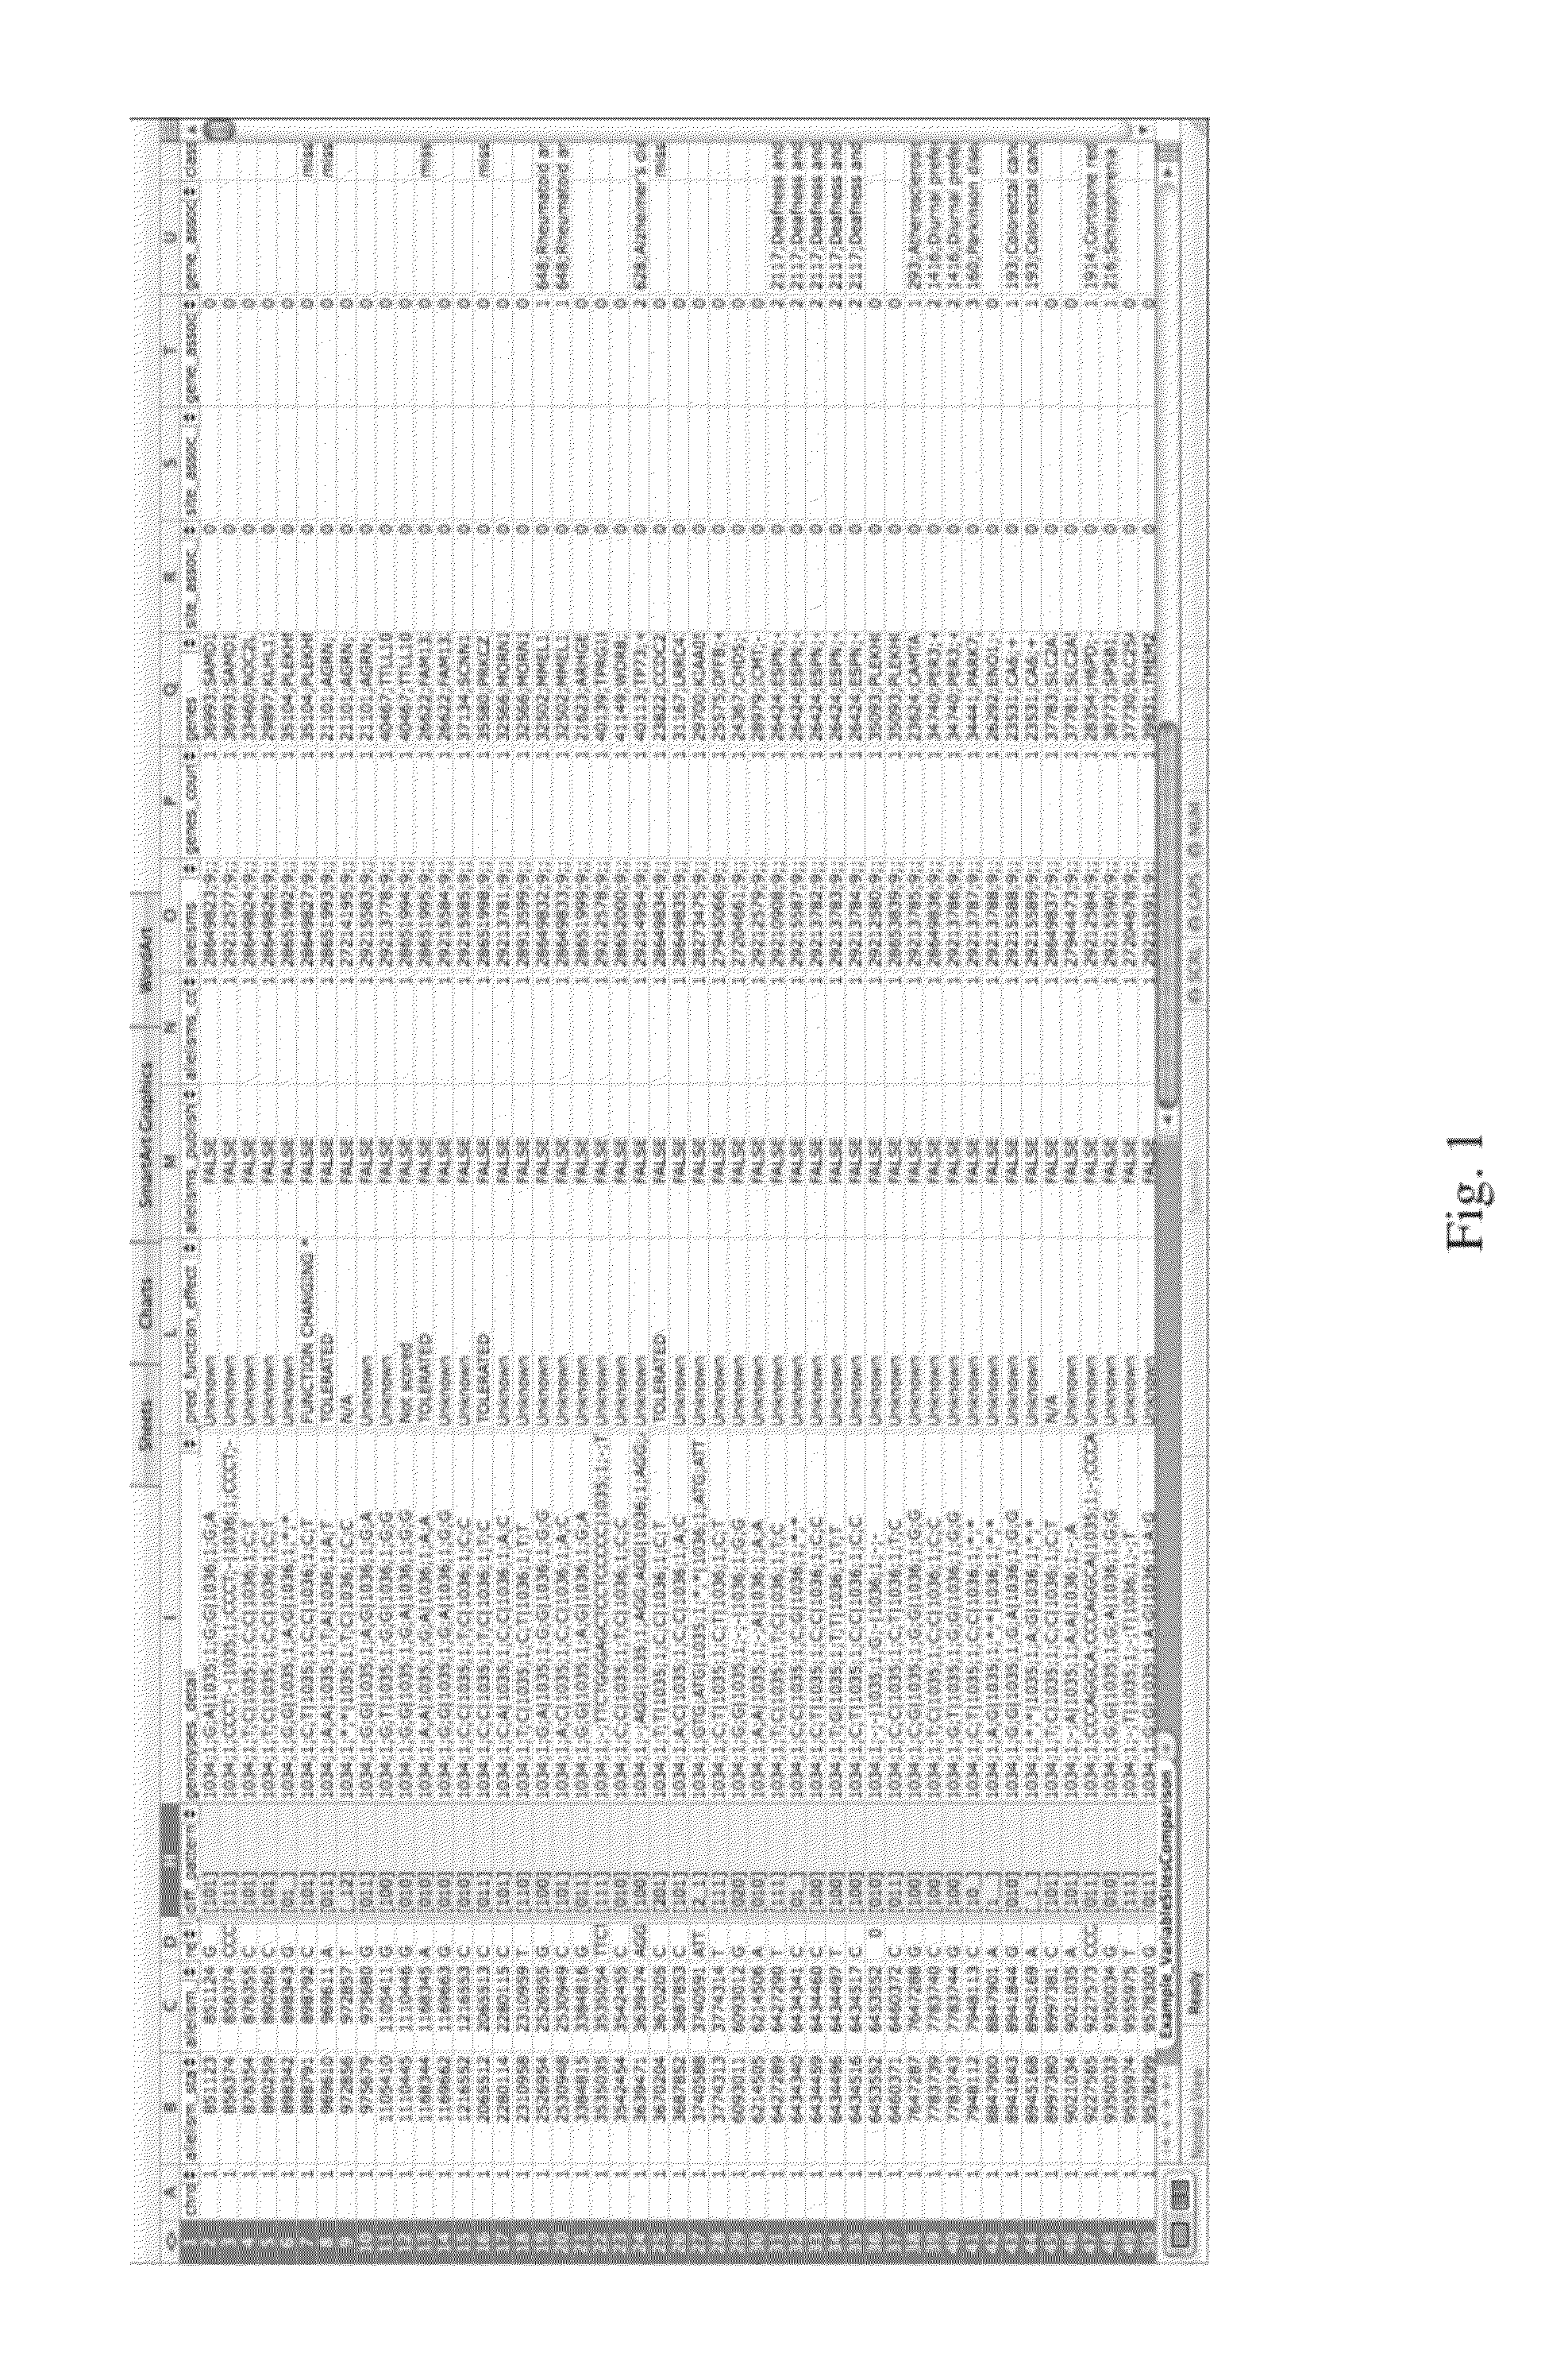 Methods and Apparatus for Assigning a Meaningful Numeric Value to Genomic Variants, and Searching and Assessing Same